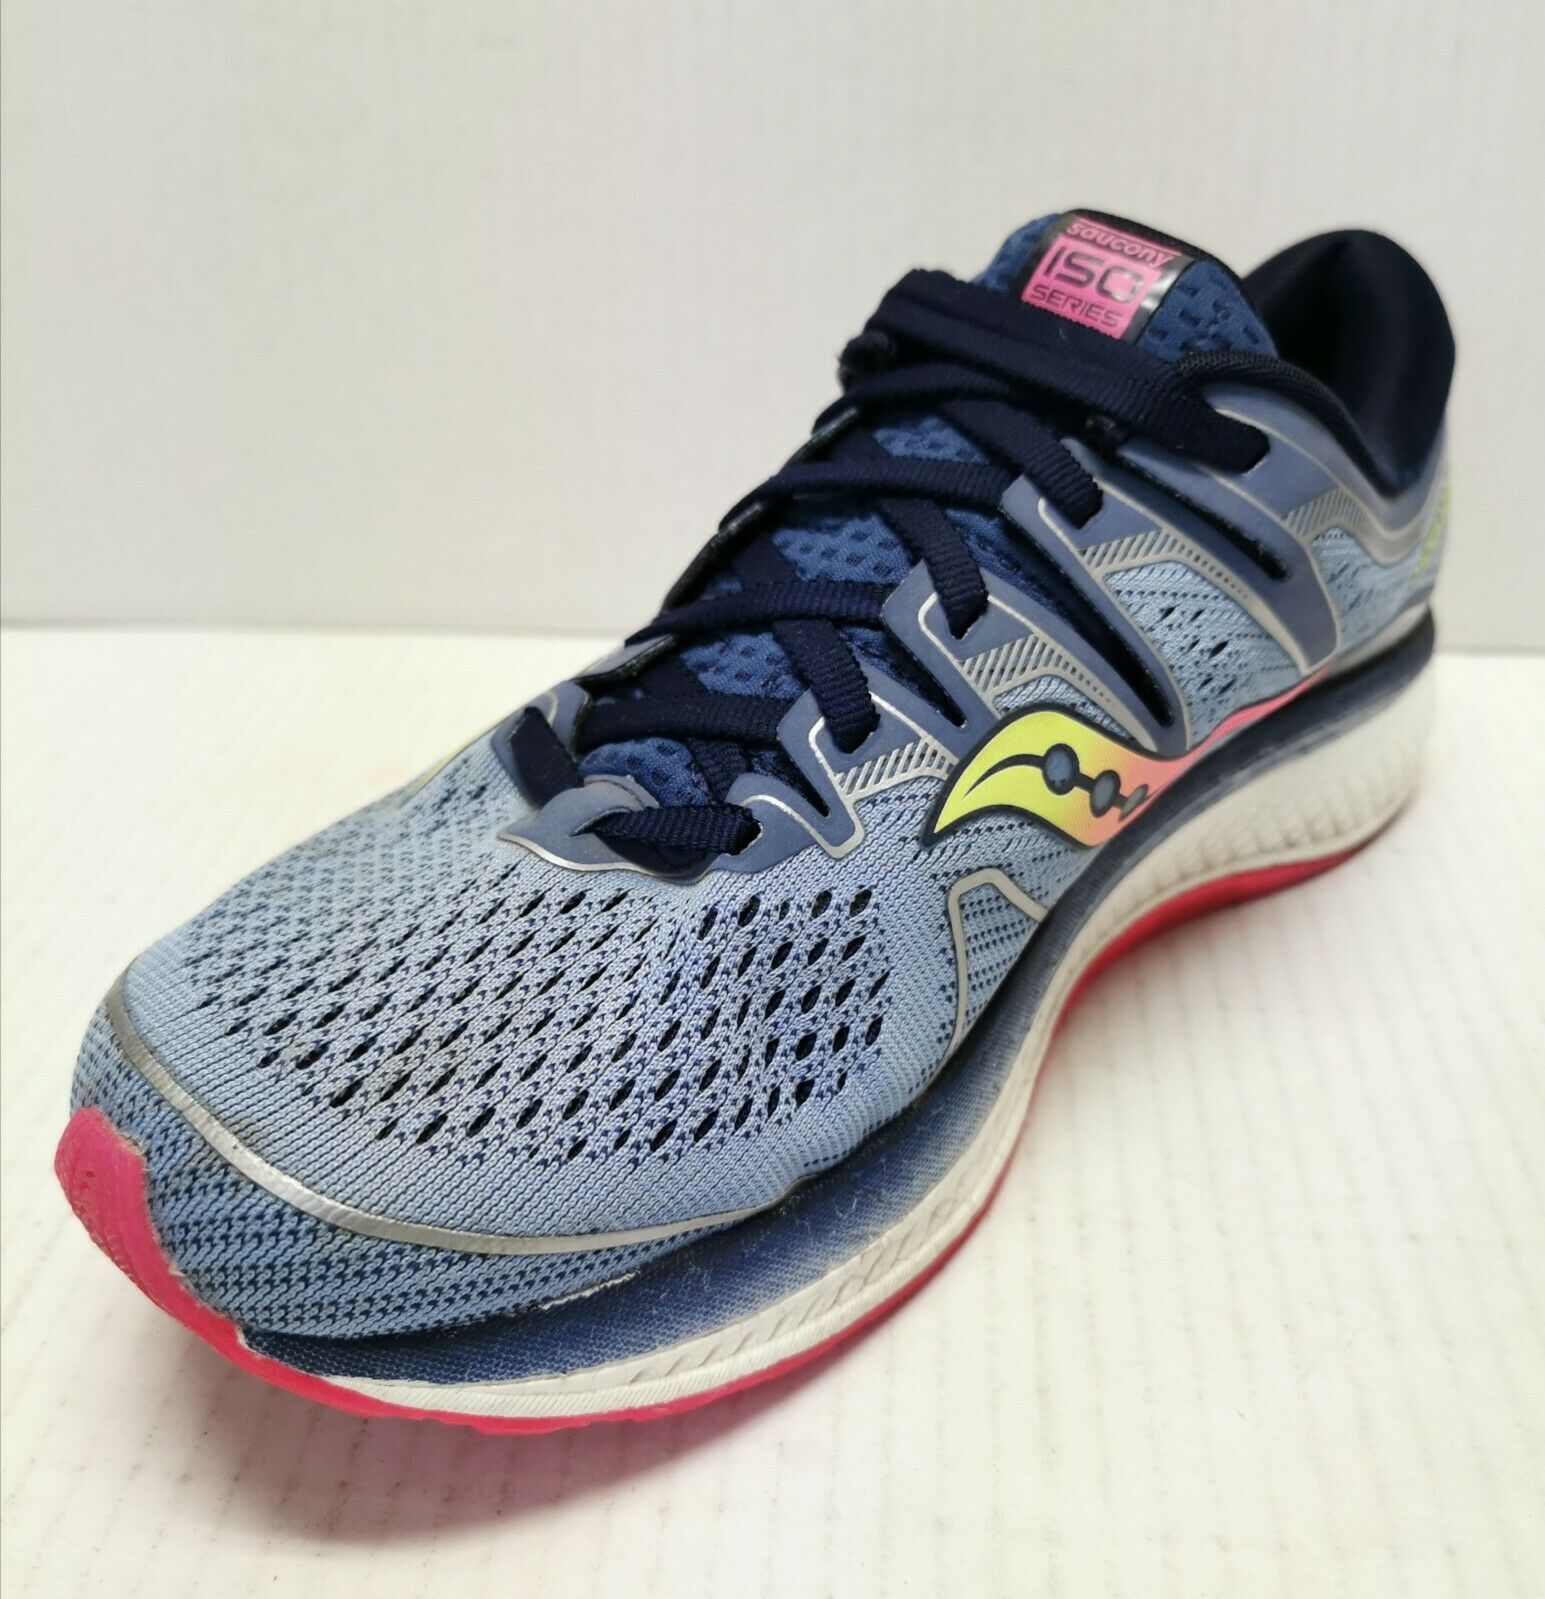 Saucony S10462-1 Women's Triumph ISO 5 Running Shoes Blue/Navy/Pink ...